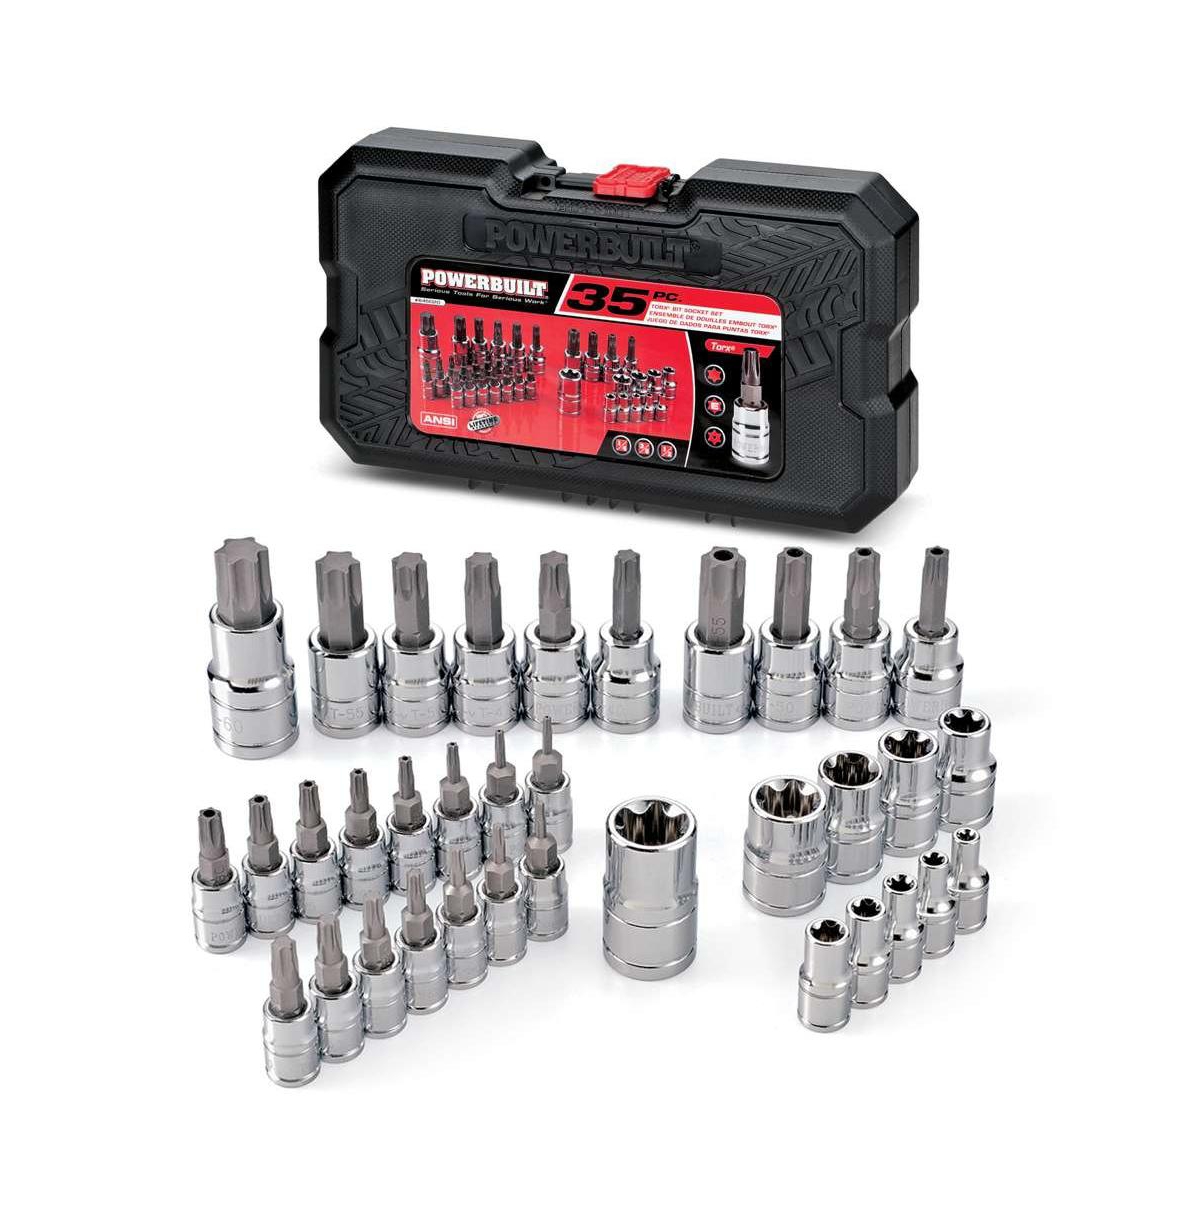 35 Piece 1/4 Inch, 3/8 Inch, and 1/2 Inch Drive Master Star Set - Silver